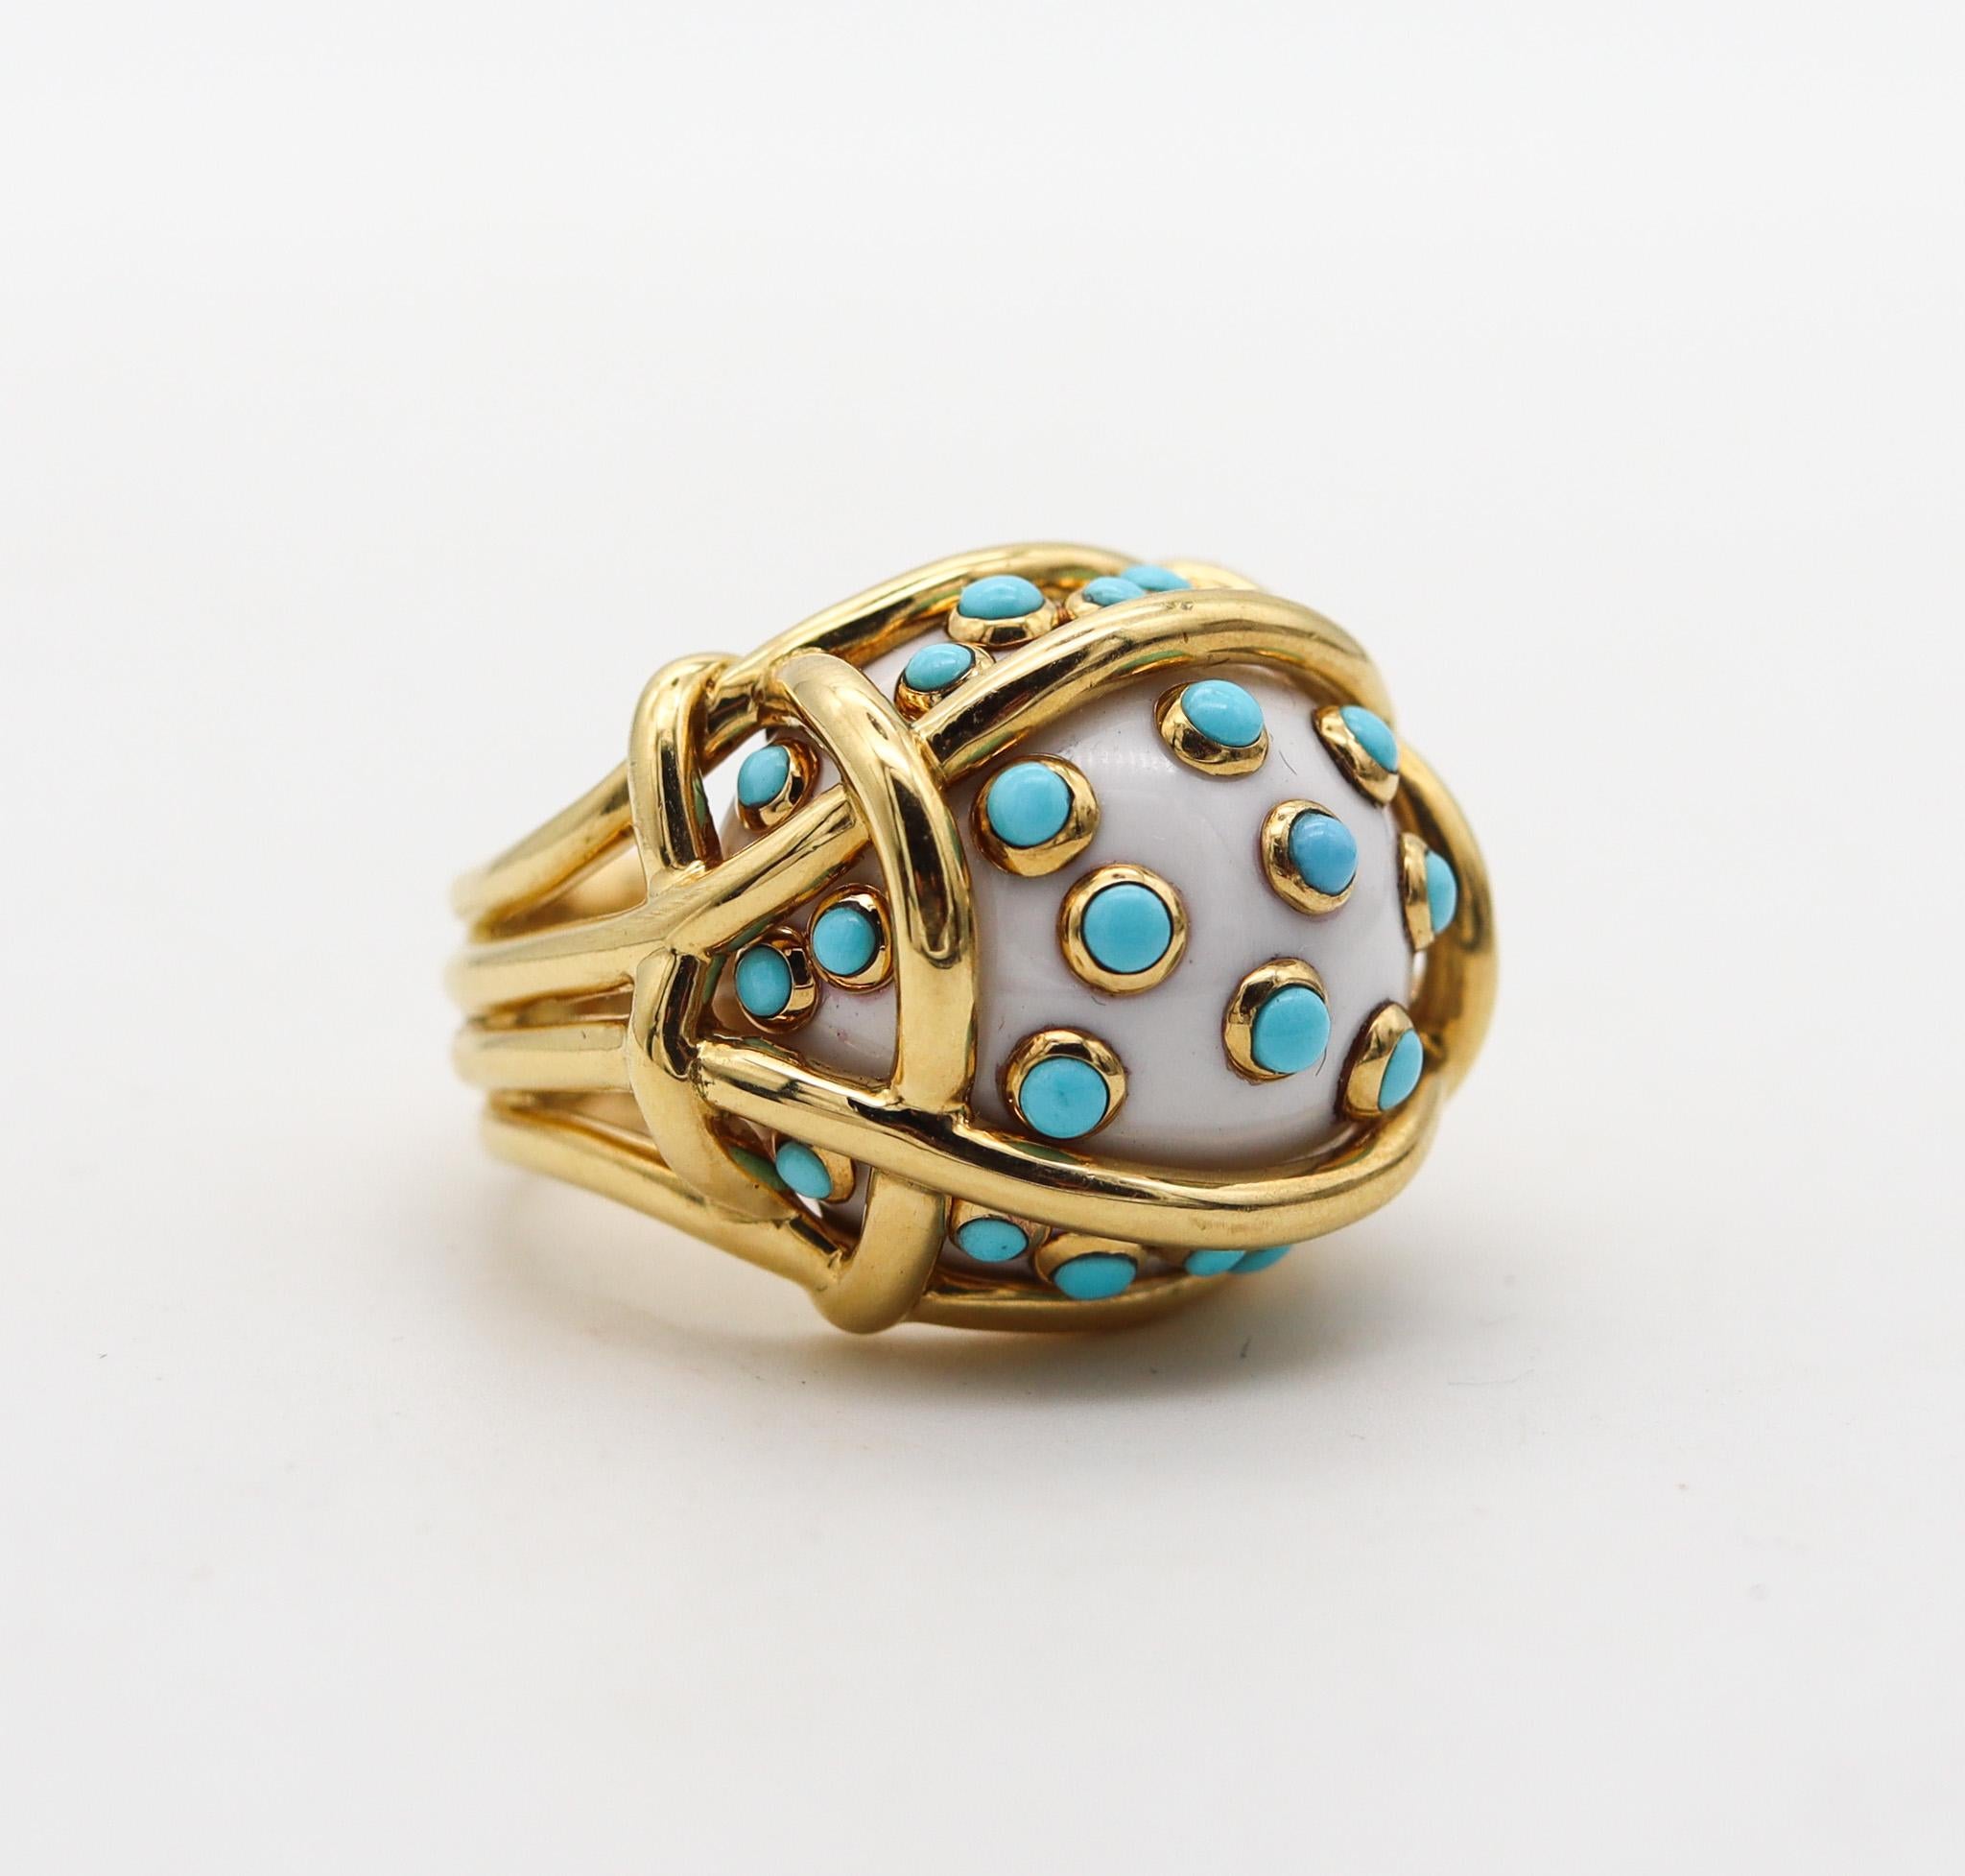 Polka dots cocktail Ring designed by Verdura.

Beautiful and colorful polka dot cocktail ring, created in Milano Italy by the jewelry house of Verdura. This iconic cocktail ring has been crafted in the shape of a wired nest in solid yellow gold of